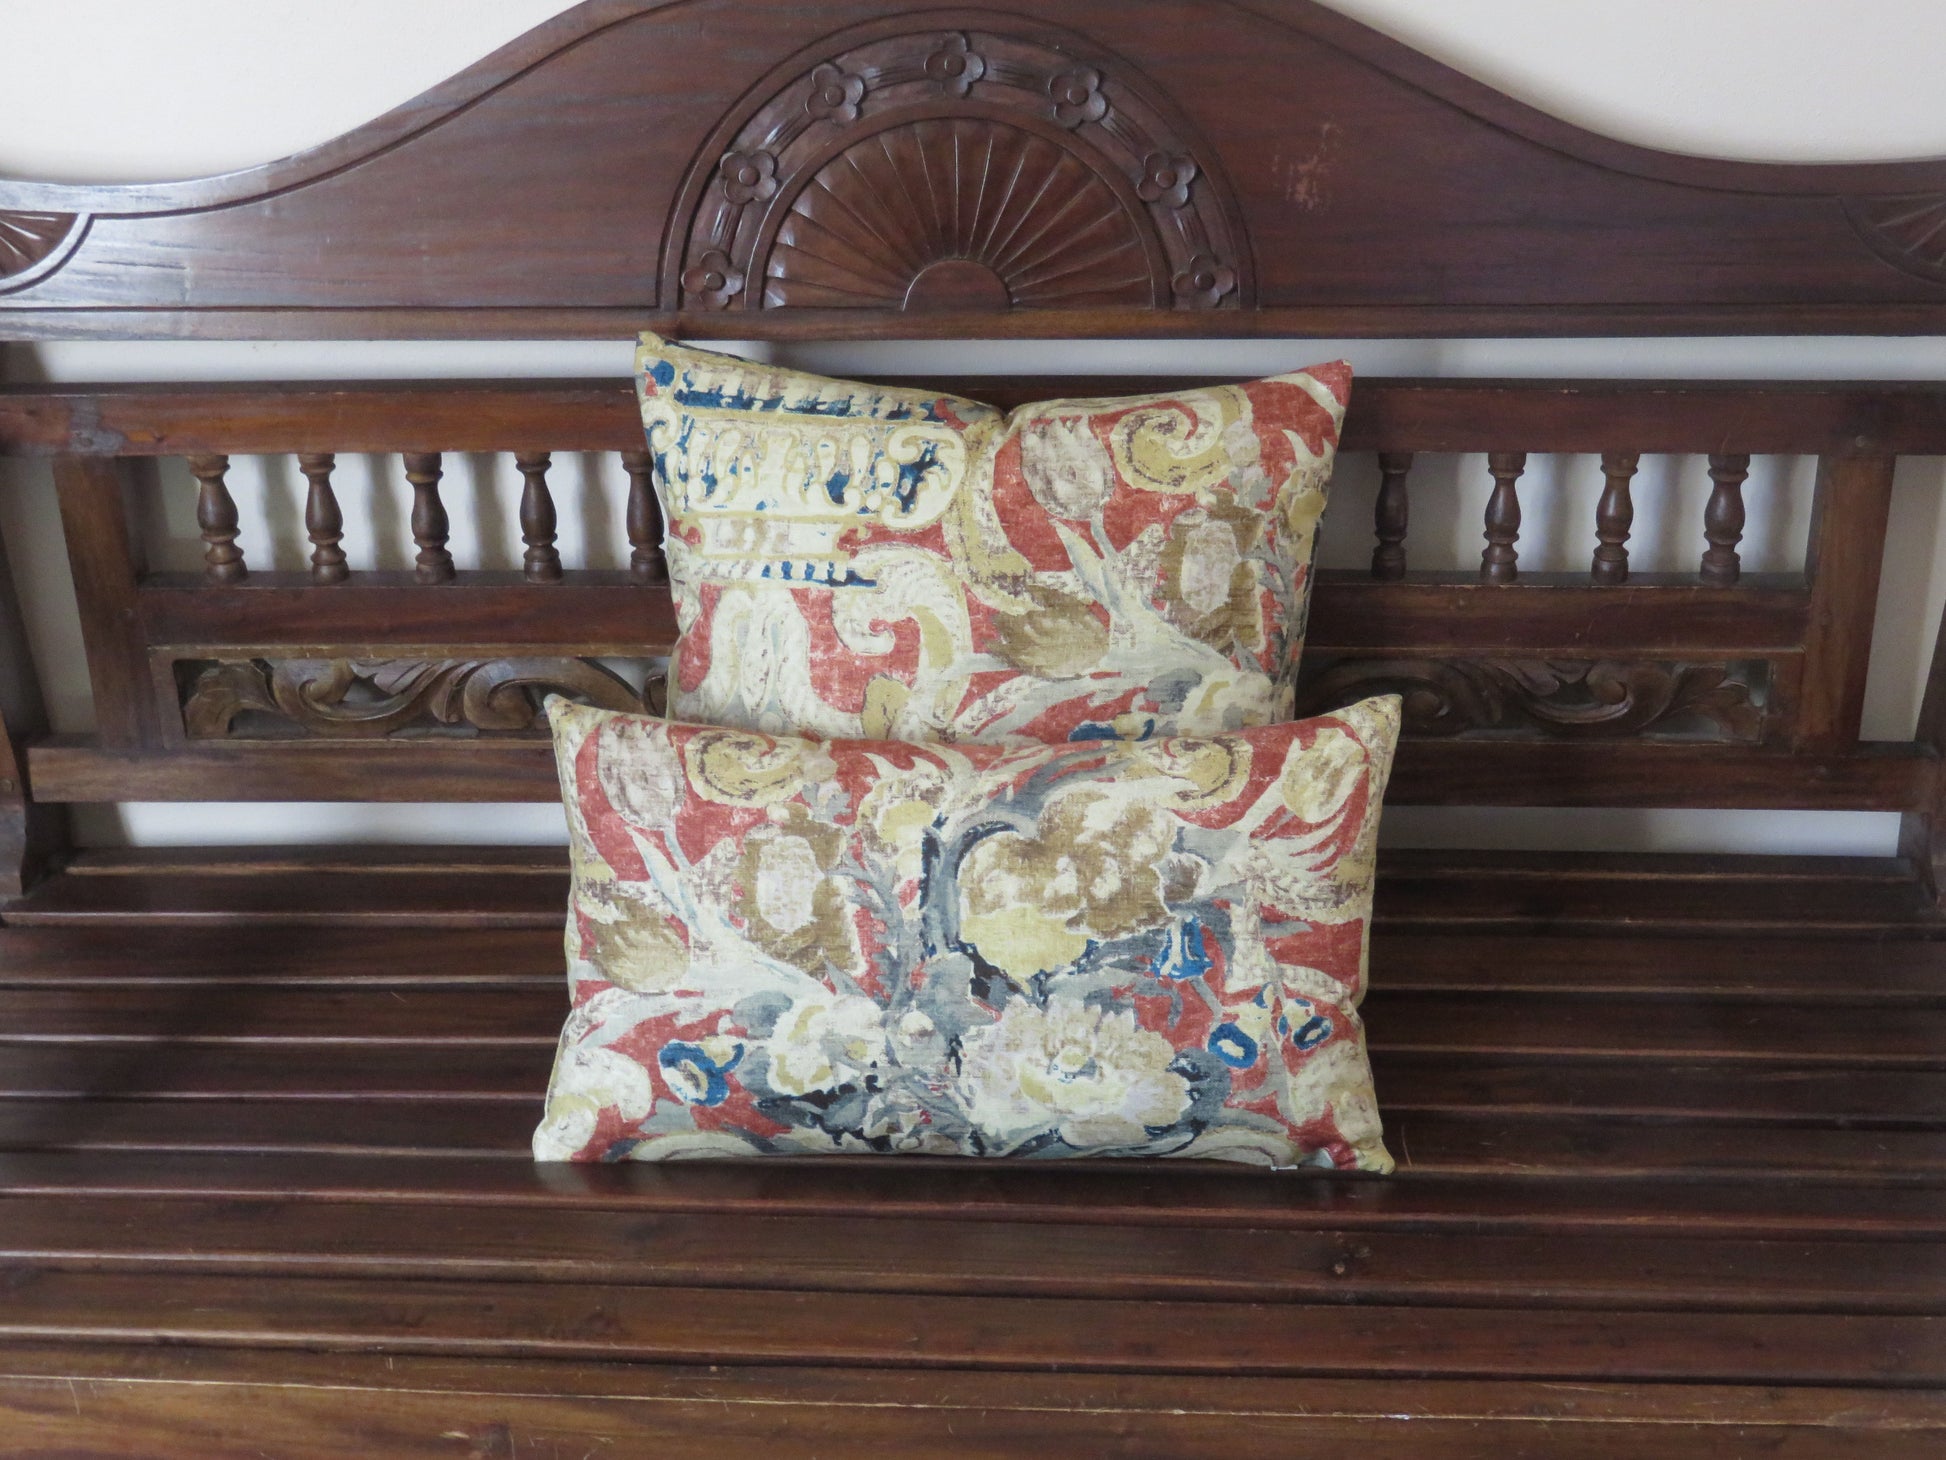 terracotta orange and indigo blue pillow cover with urn and floral motif, mag=de from Waverly Di Castello in Henna cotton fabric